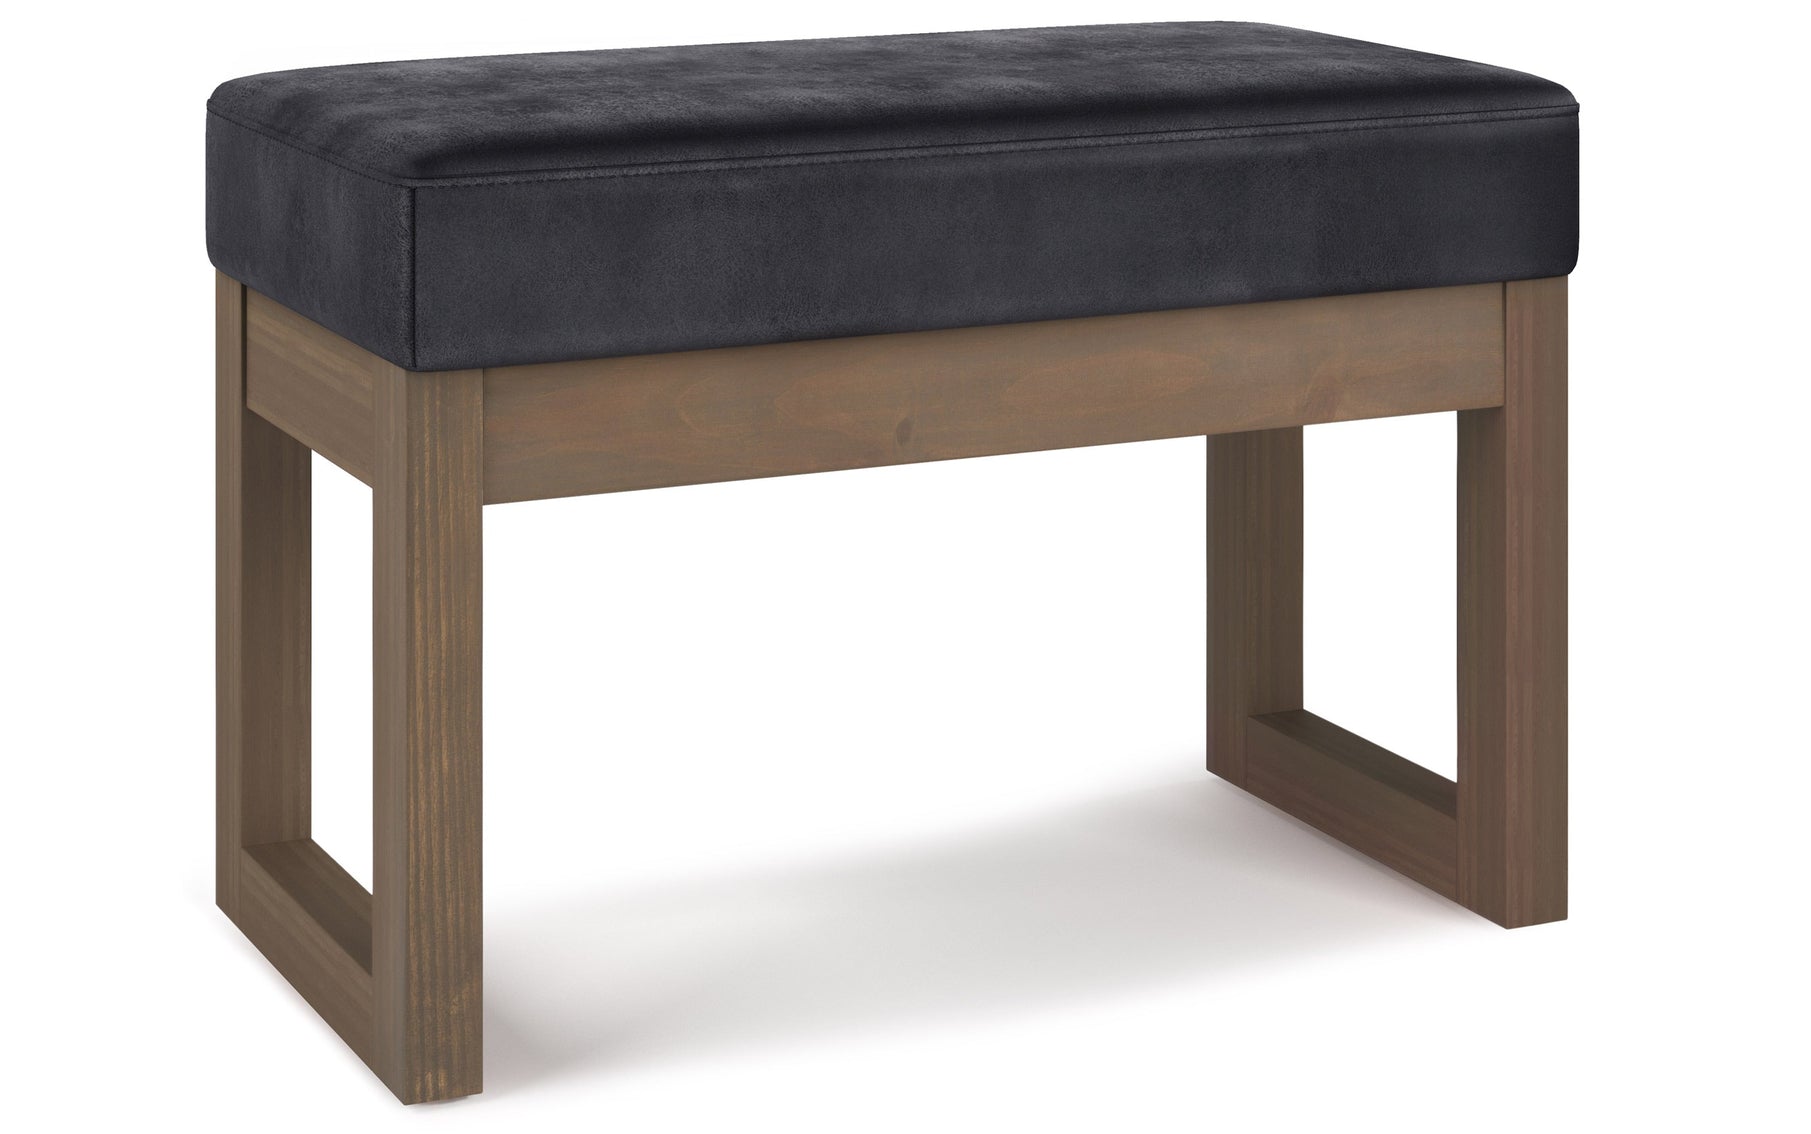 Distressed Black Distressed Vegan Leather | Milltown Footstool Small Ottoman Bench